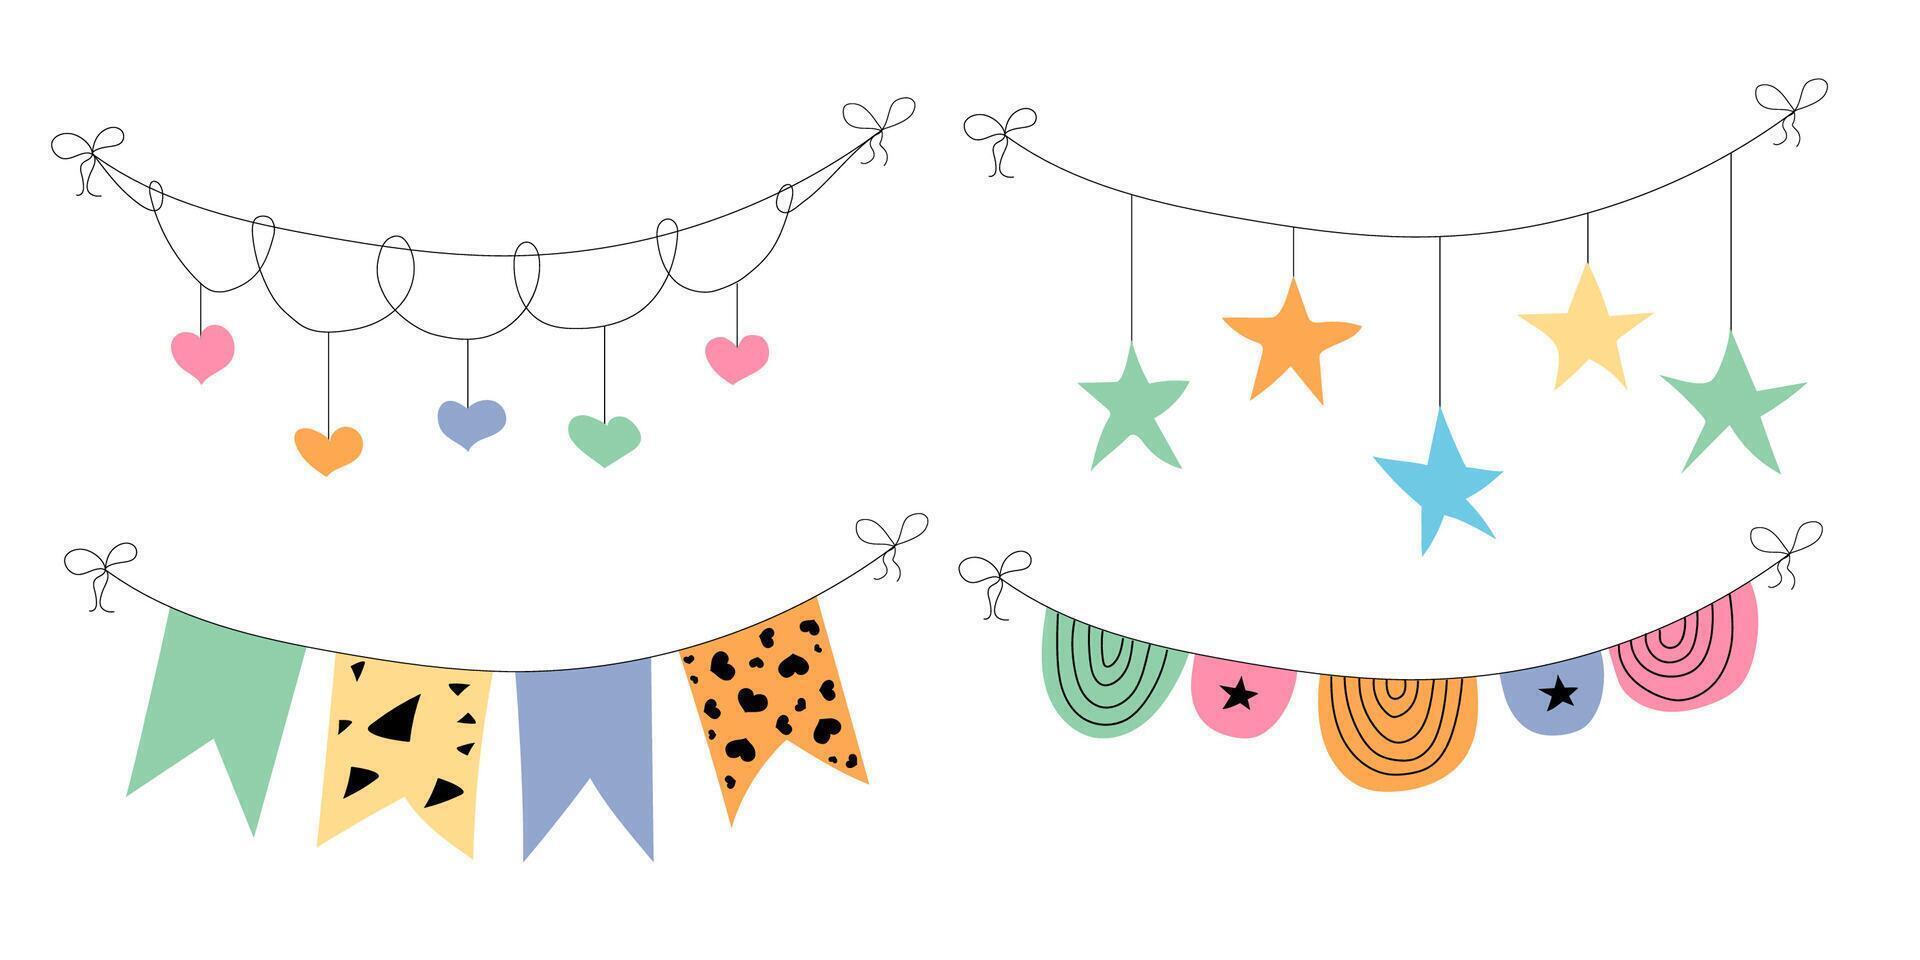 Flag garland bunting heart, star birthday party flat set. Anniversary, celebration party hanging flags cartoon collection. Buntings pennants, festival decoration. Isolated vector illustration.